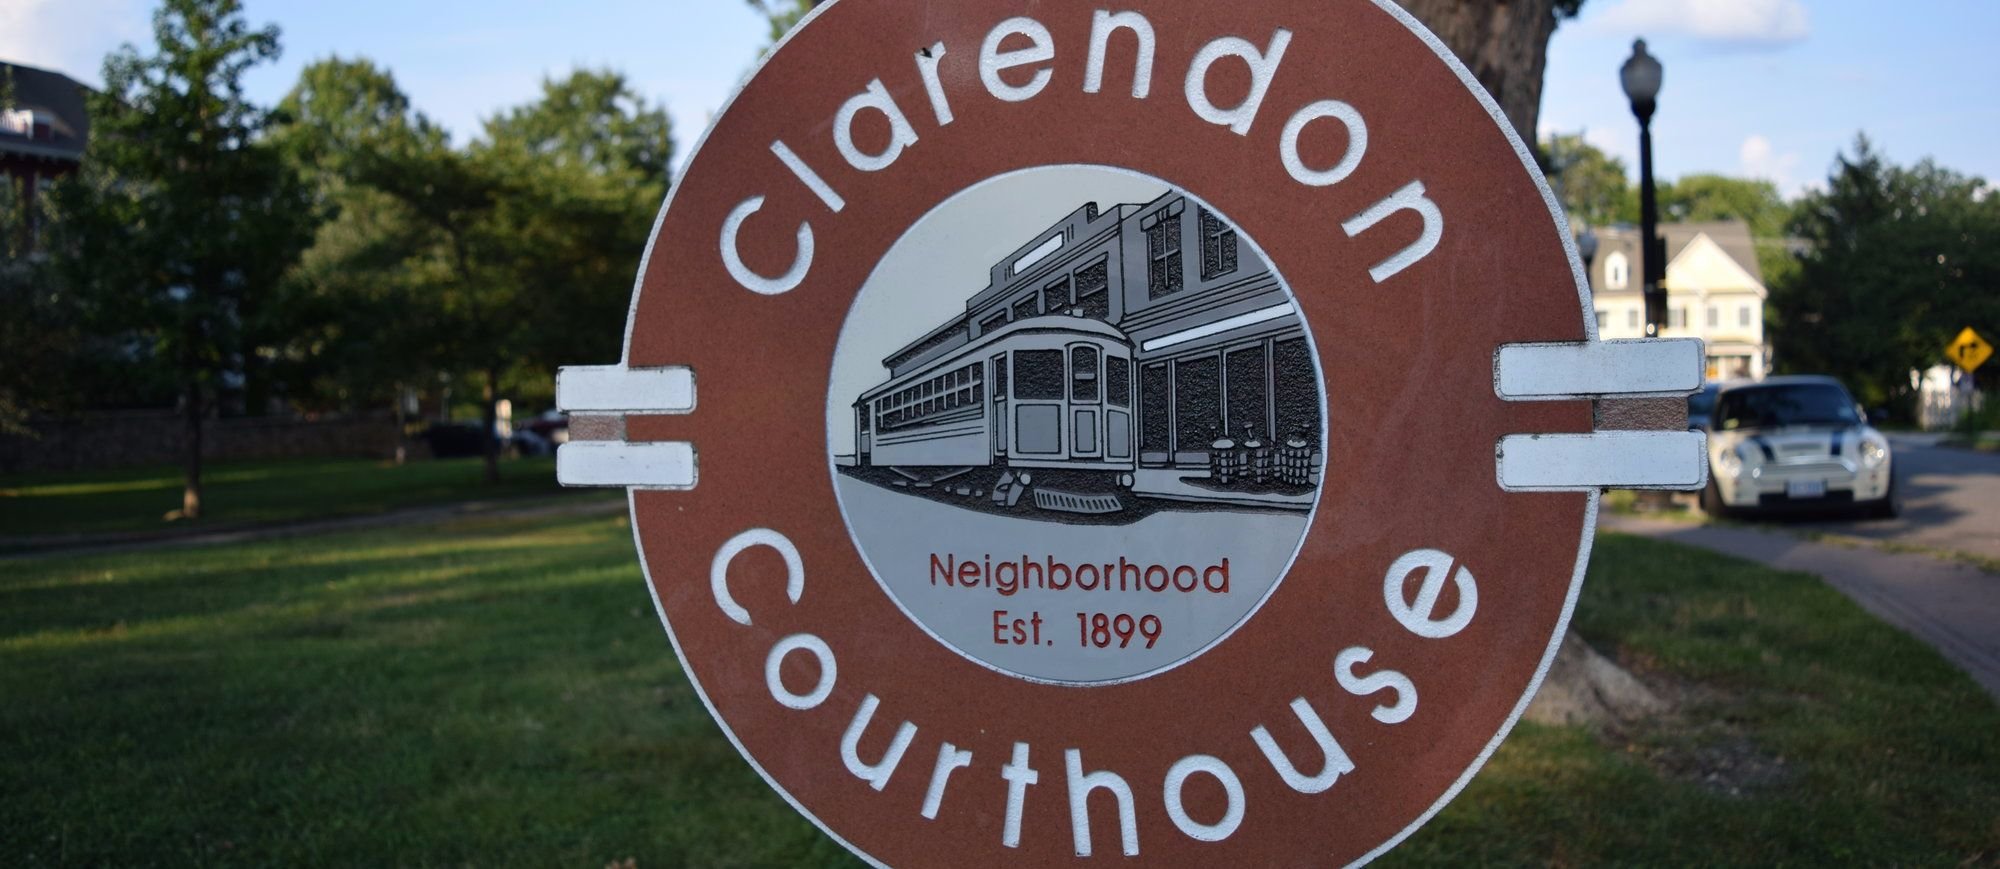 clarendon-courthouse condos for sale